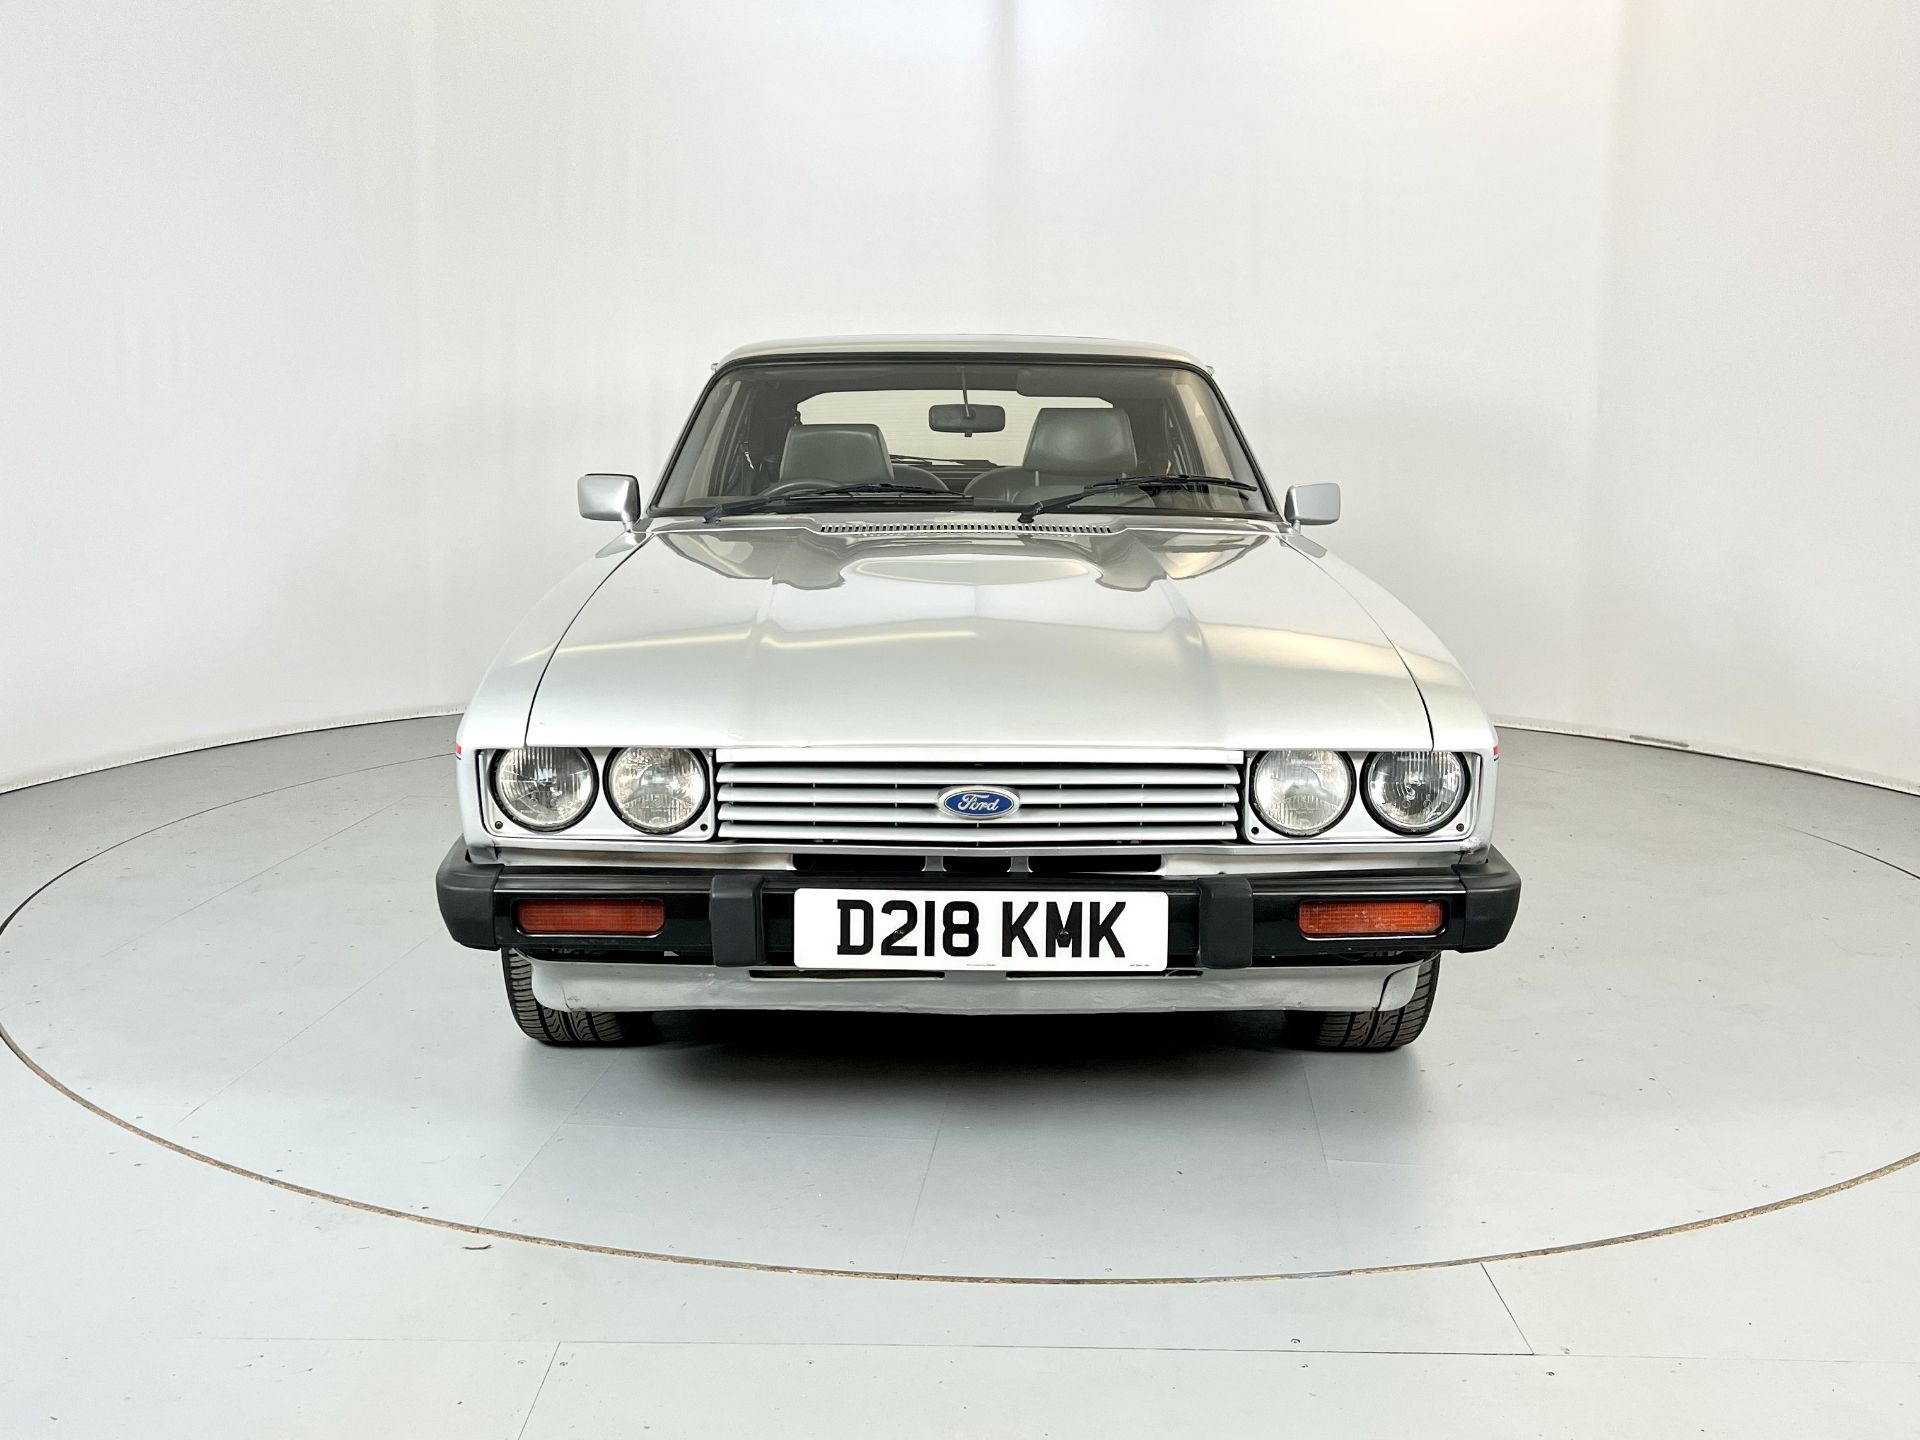 Ford Capri 2.8 Injection - Image 2 of 30